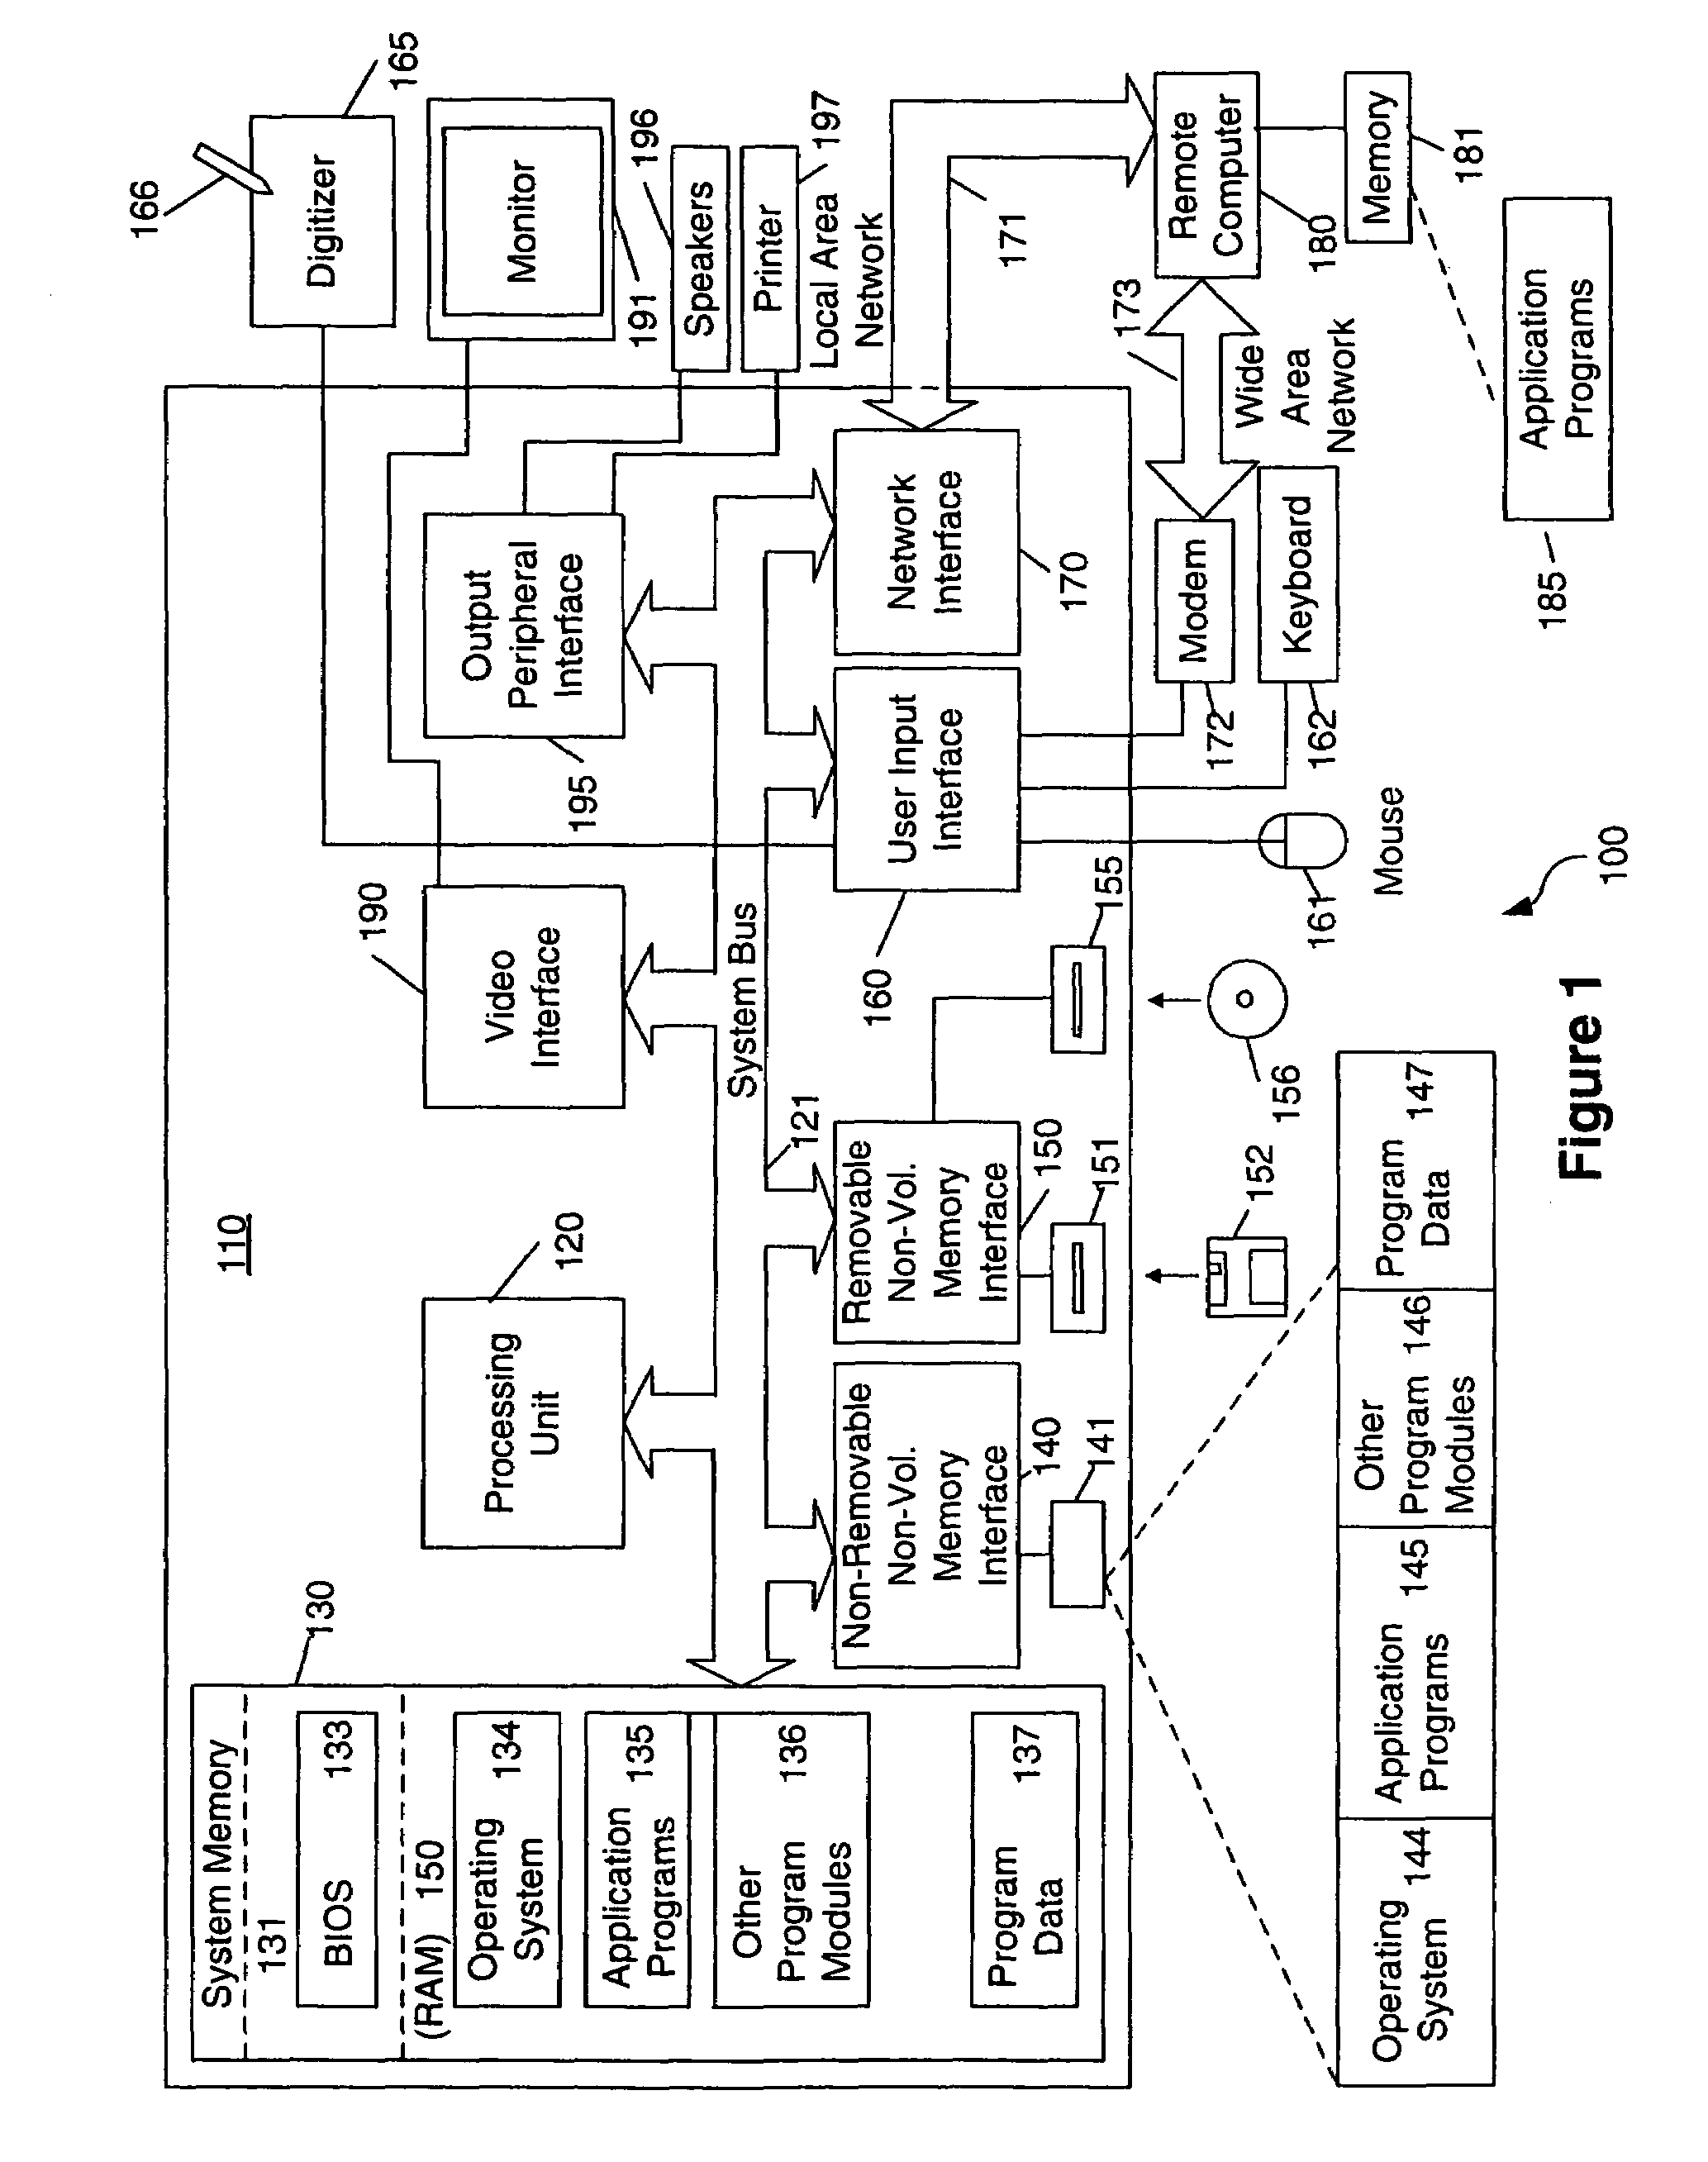 Stroke localization and binding to electronic document